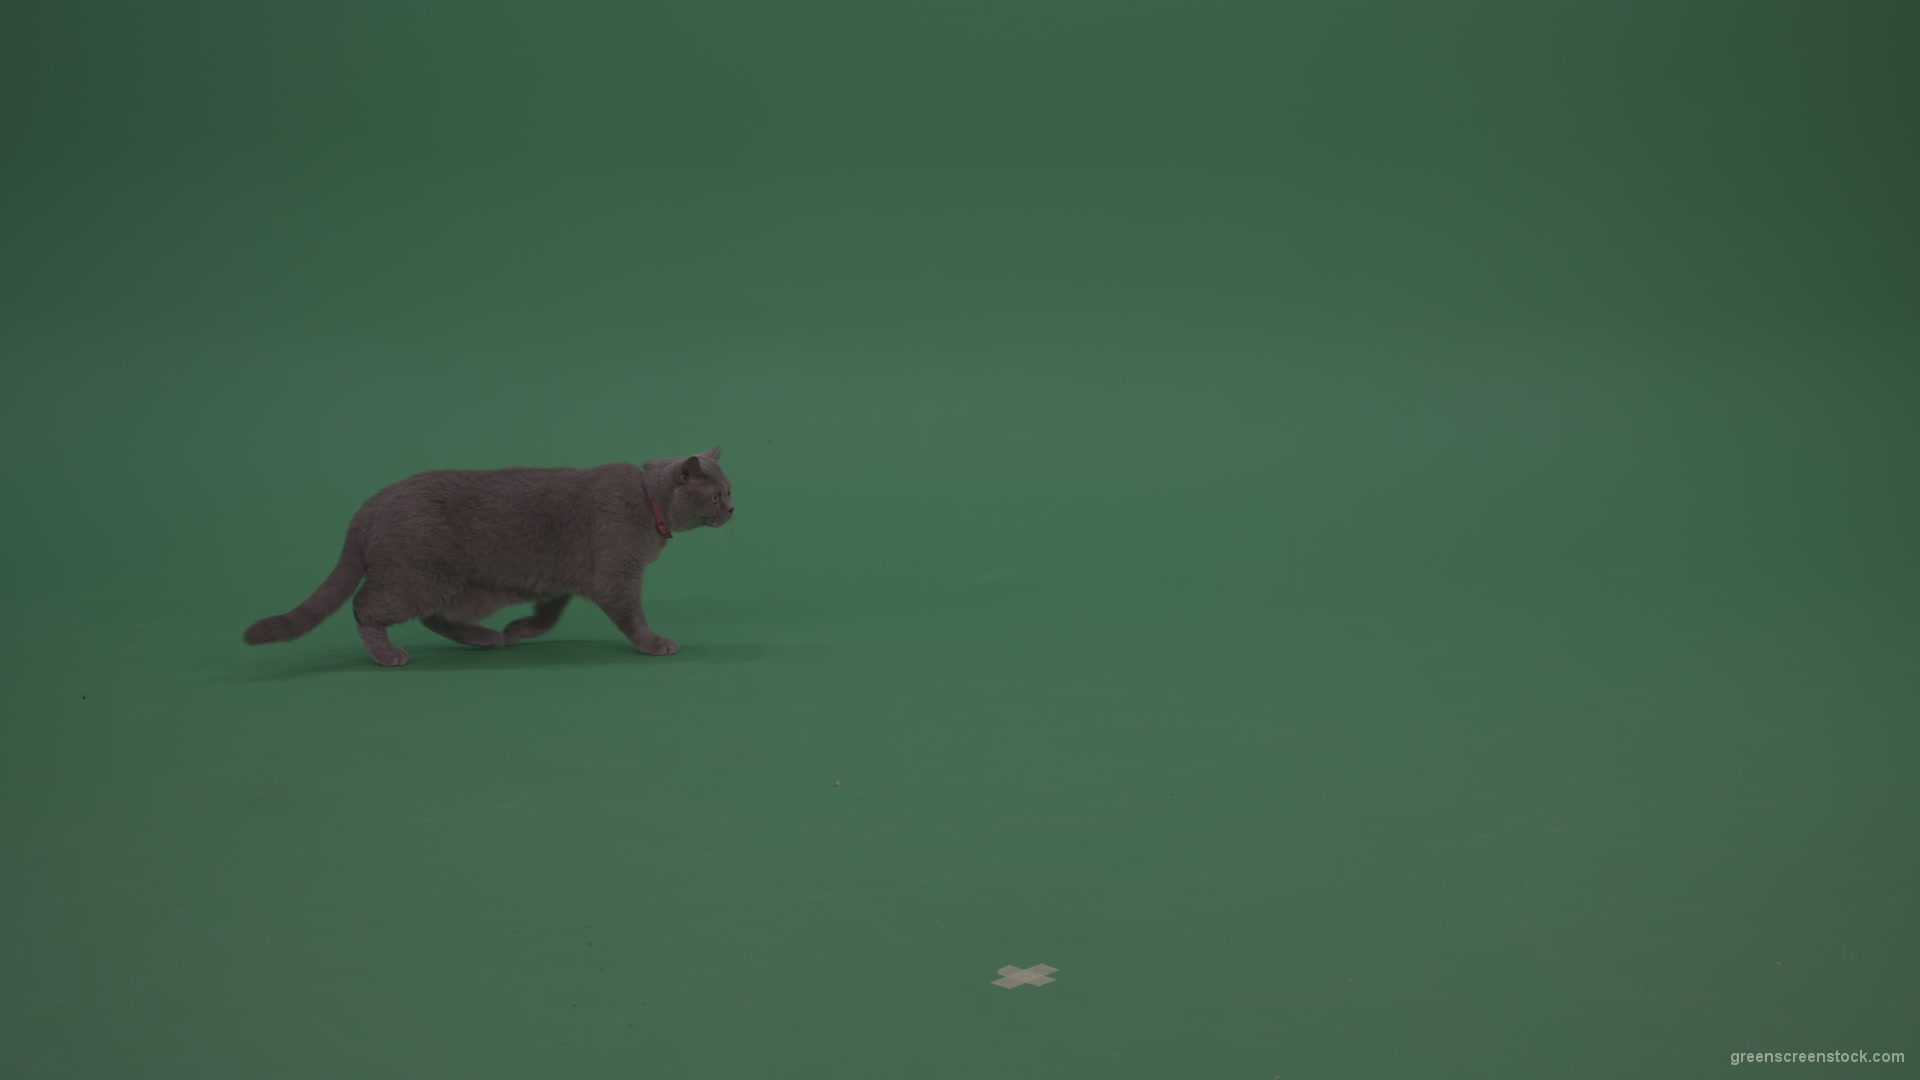 British-Cat-Crawling-Learning-Territory-Looking-Around-Then-Walking-Away-On-Green-Screen-Wall-Green-Screen-Background_007 Green Screen Stock